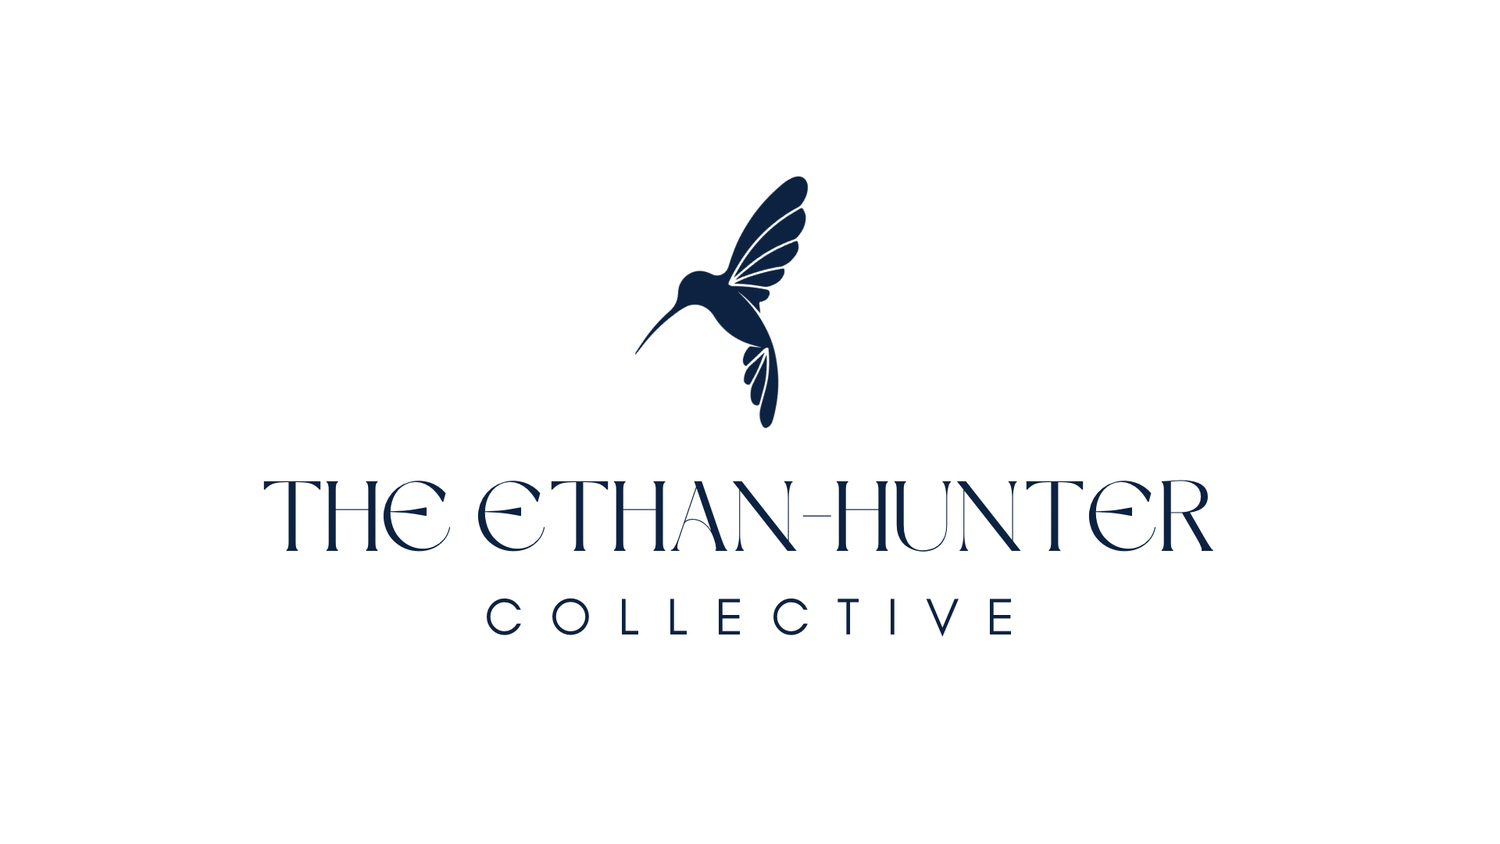 THE ETHAN-HUNTER COLLECTIVE